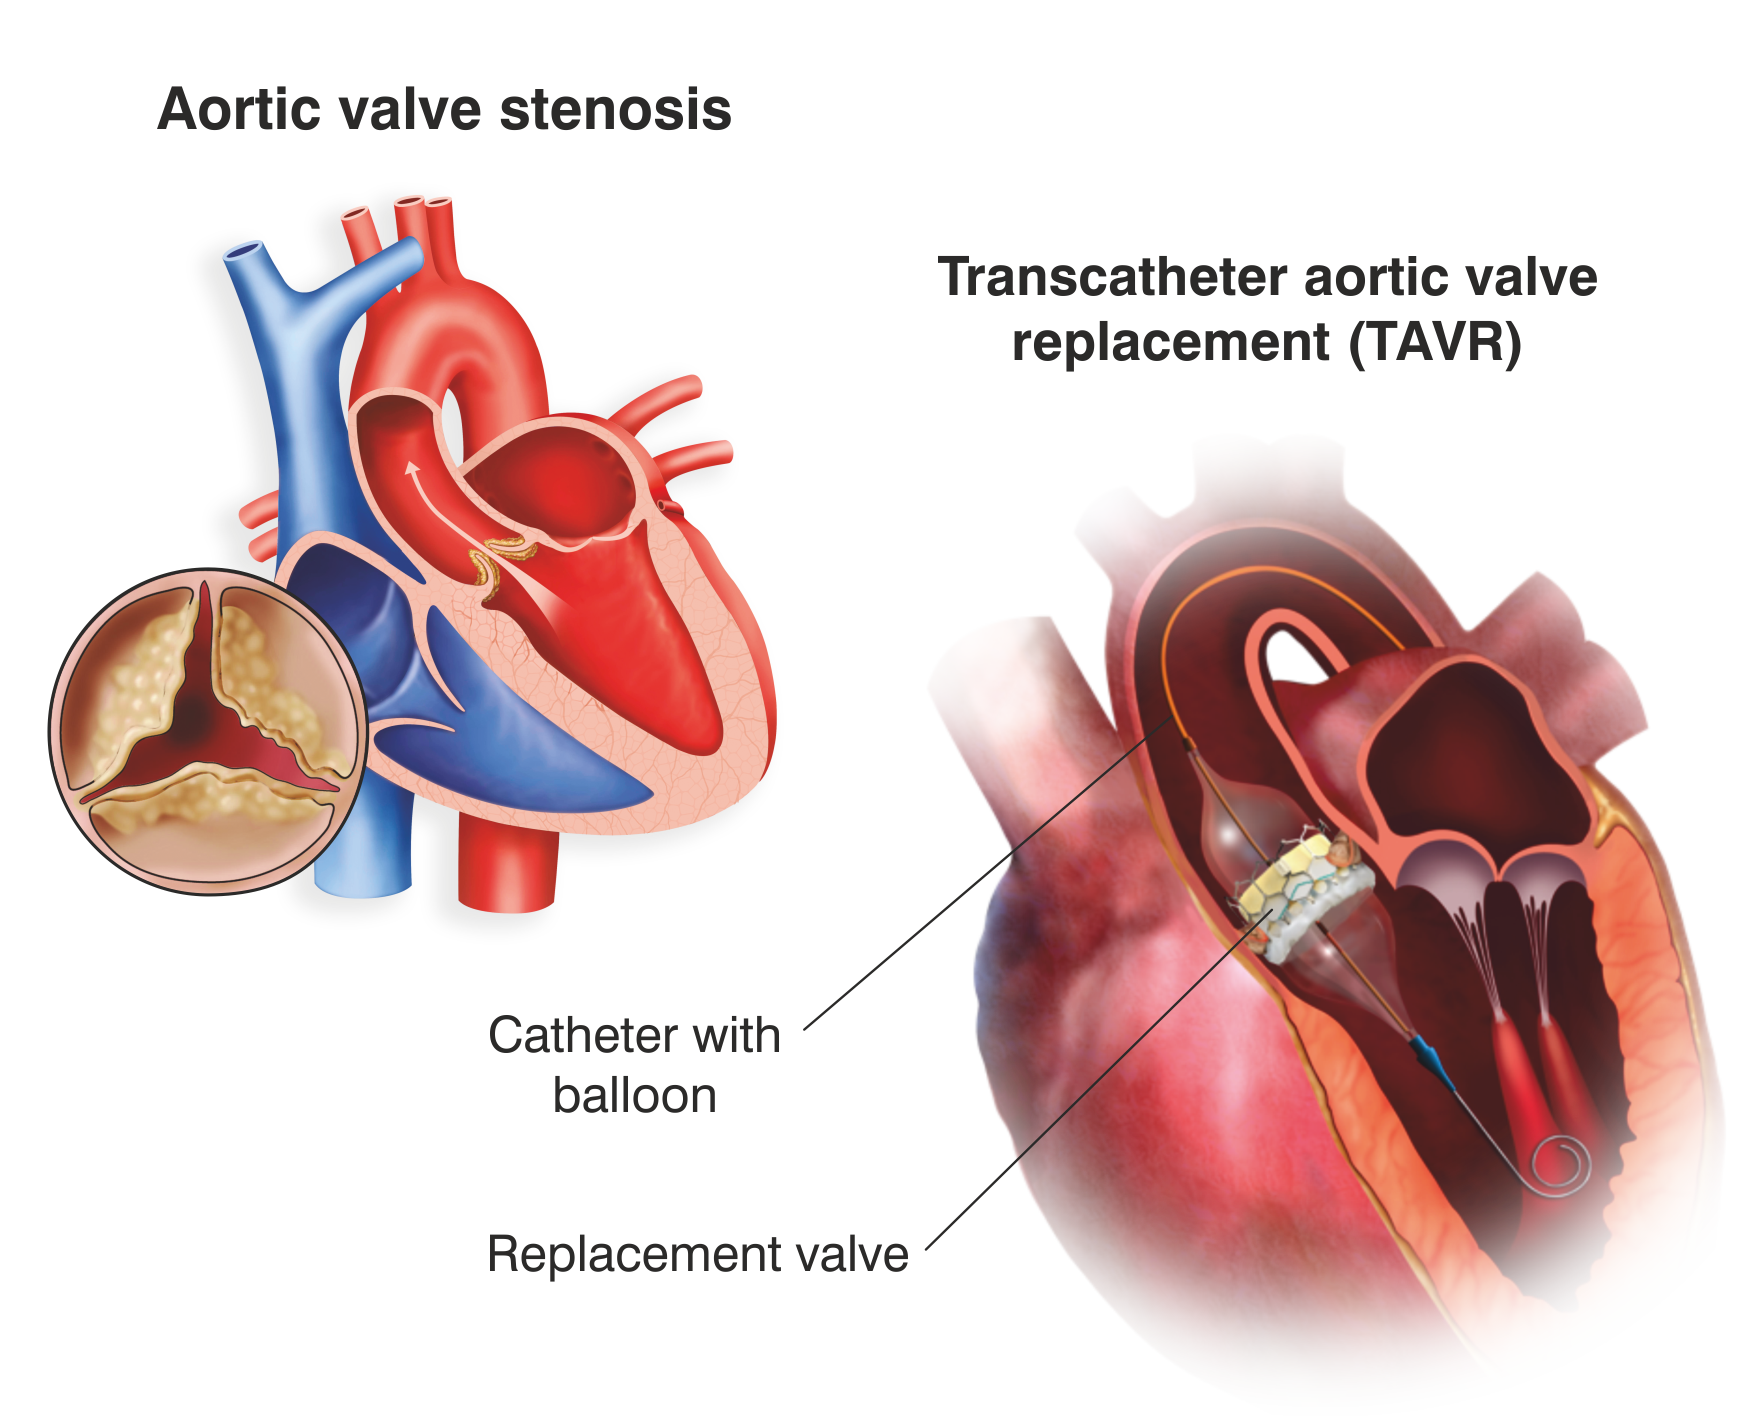 A visual representation of TAVR and aortic valve stenosis in the heart.